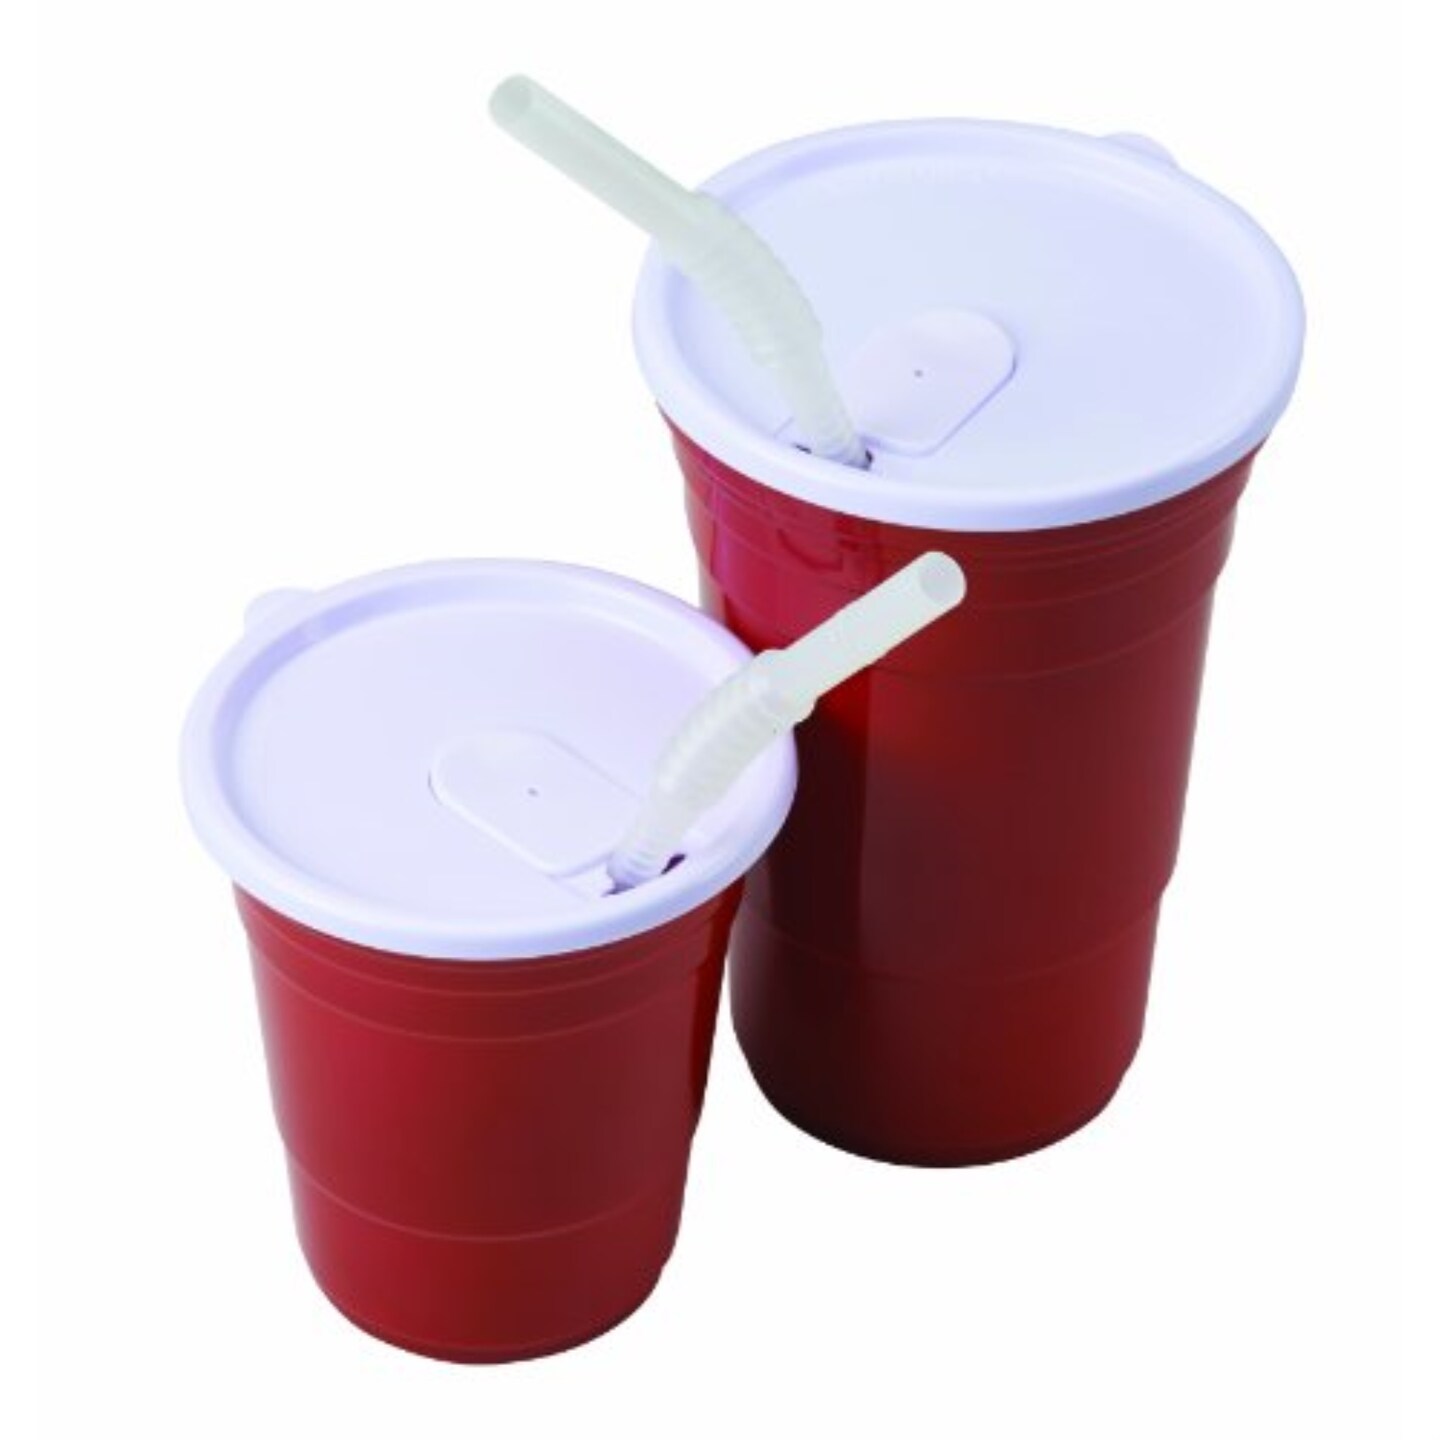 Red Cup Living 4524 Drinking Straws for 18 oz. Cup, 18 Ounce